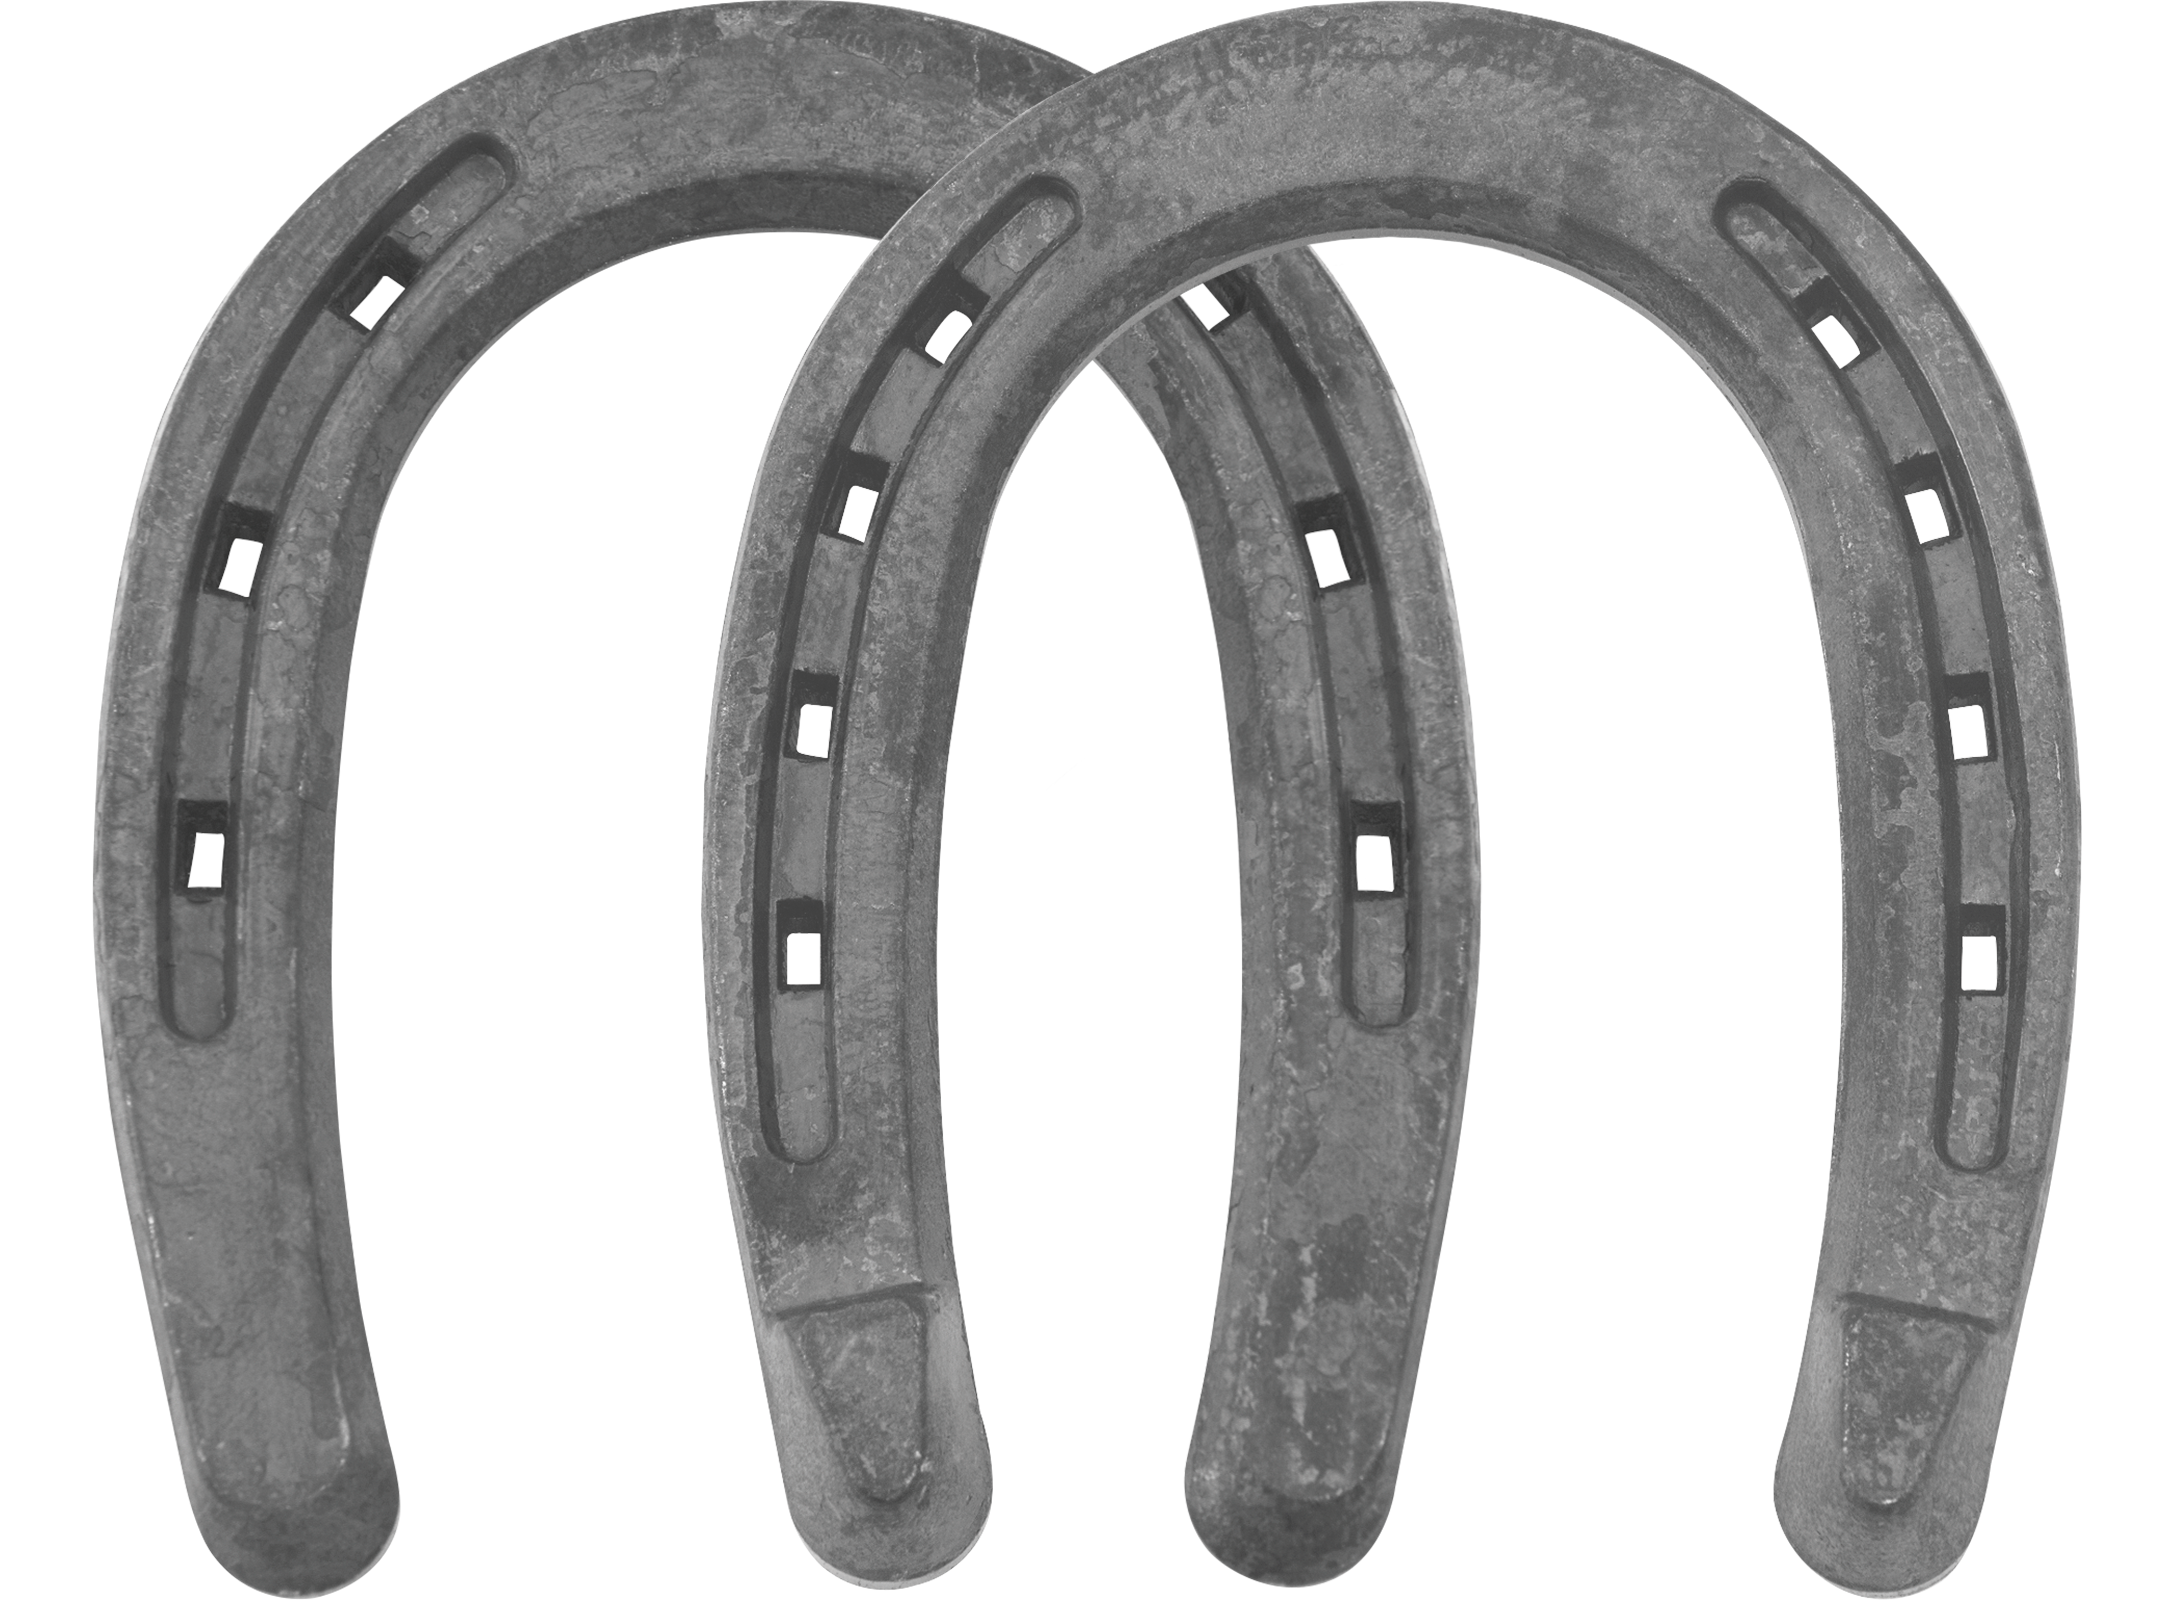 St. Croix Mule and Mule Heeled horseshoes, bottom view